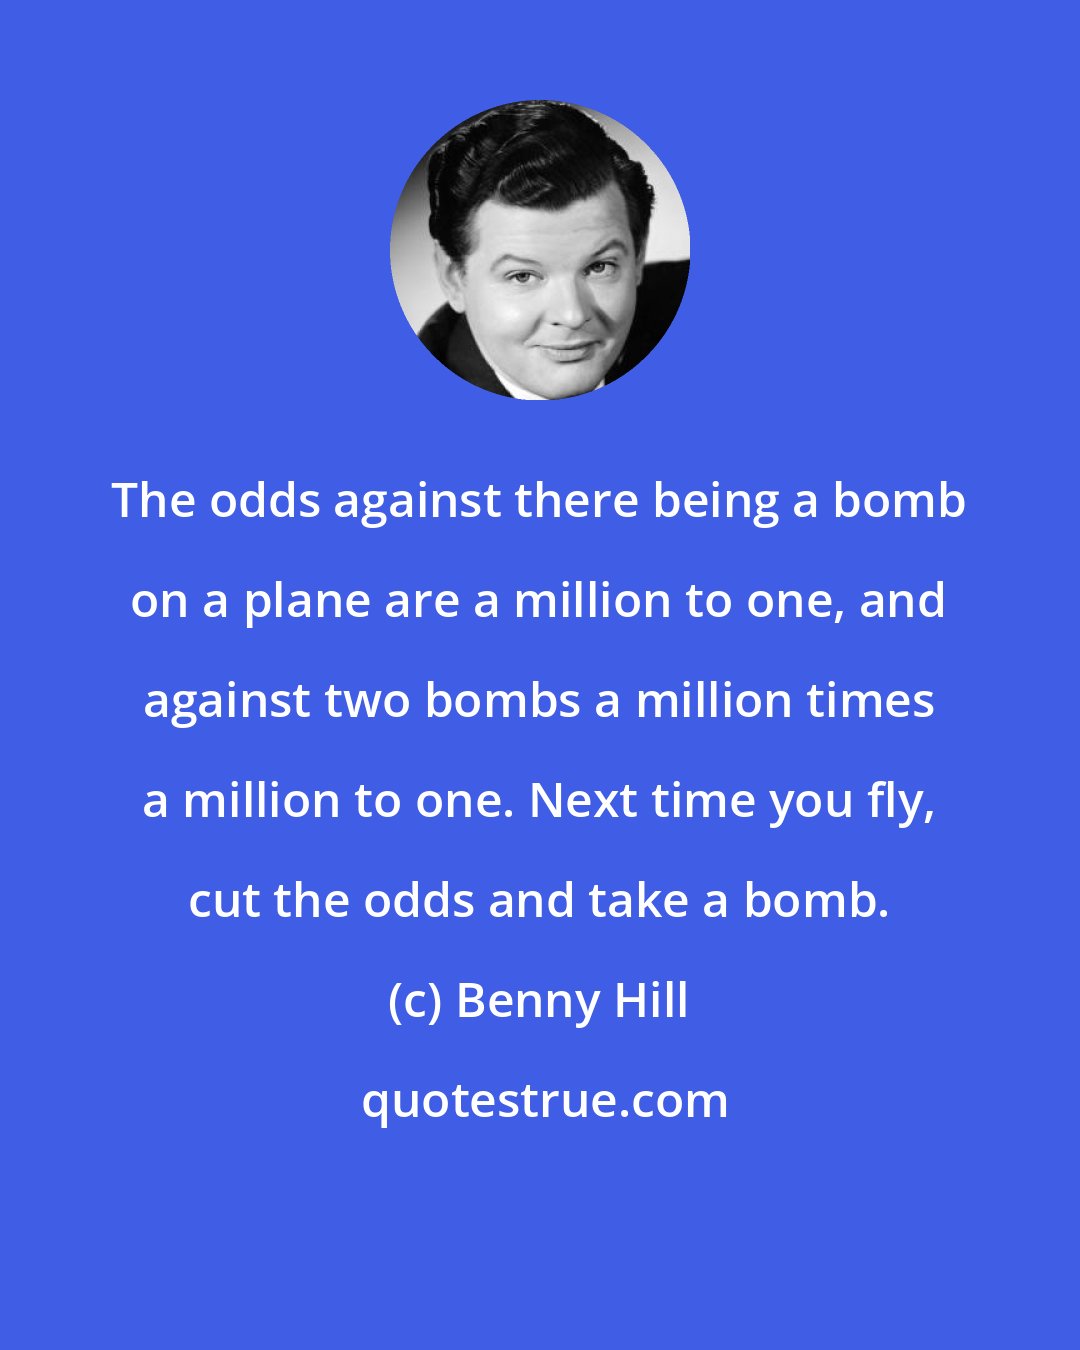 Benny Hill: The odds against there being a bomb on a plane are a million to one, and against two bombs a million times a million to one. Next time you fly, cut the odds and take a bomb.